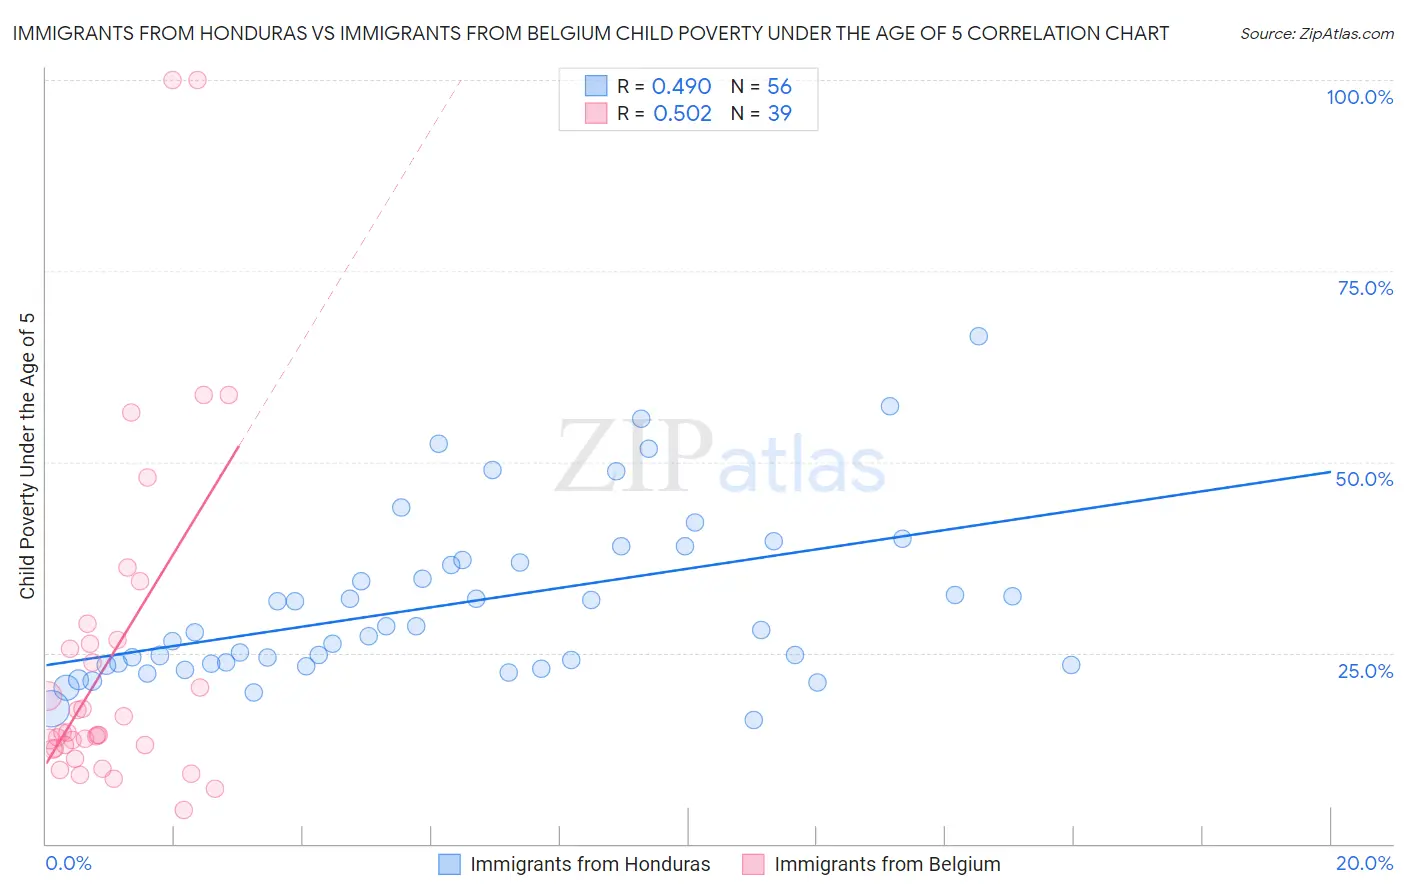 Immigrants from Honduras vs Immigrants from Belgium Child Poverty Under the Age of 5